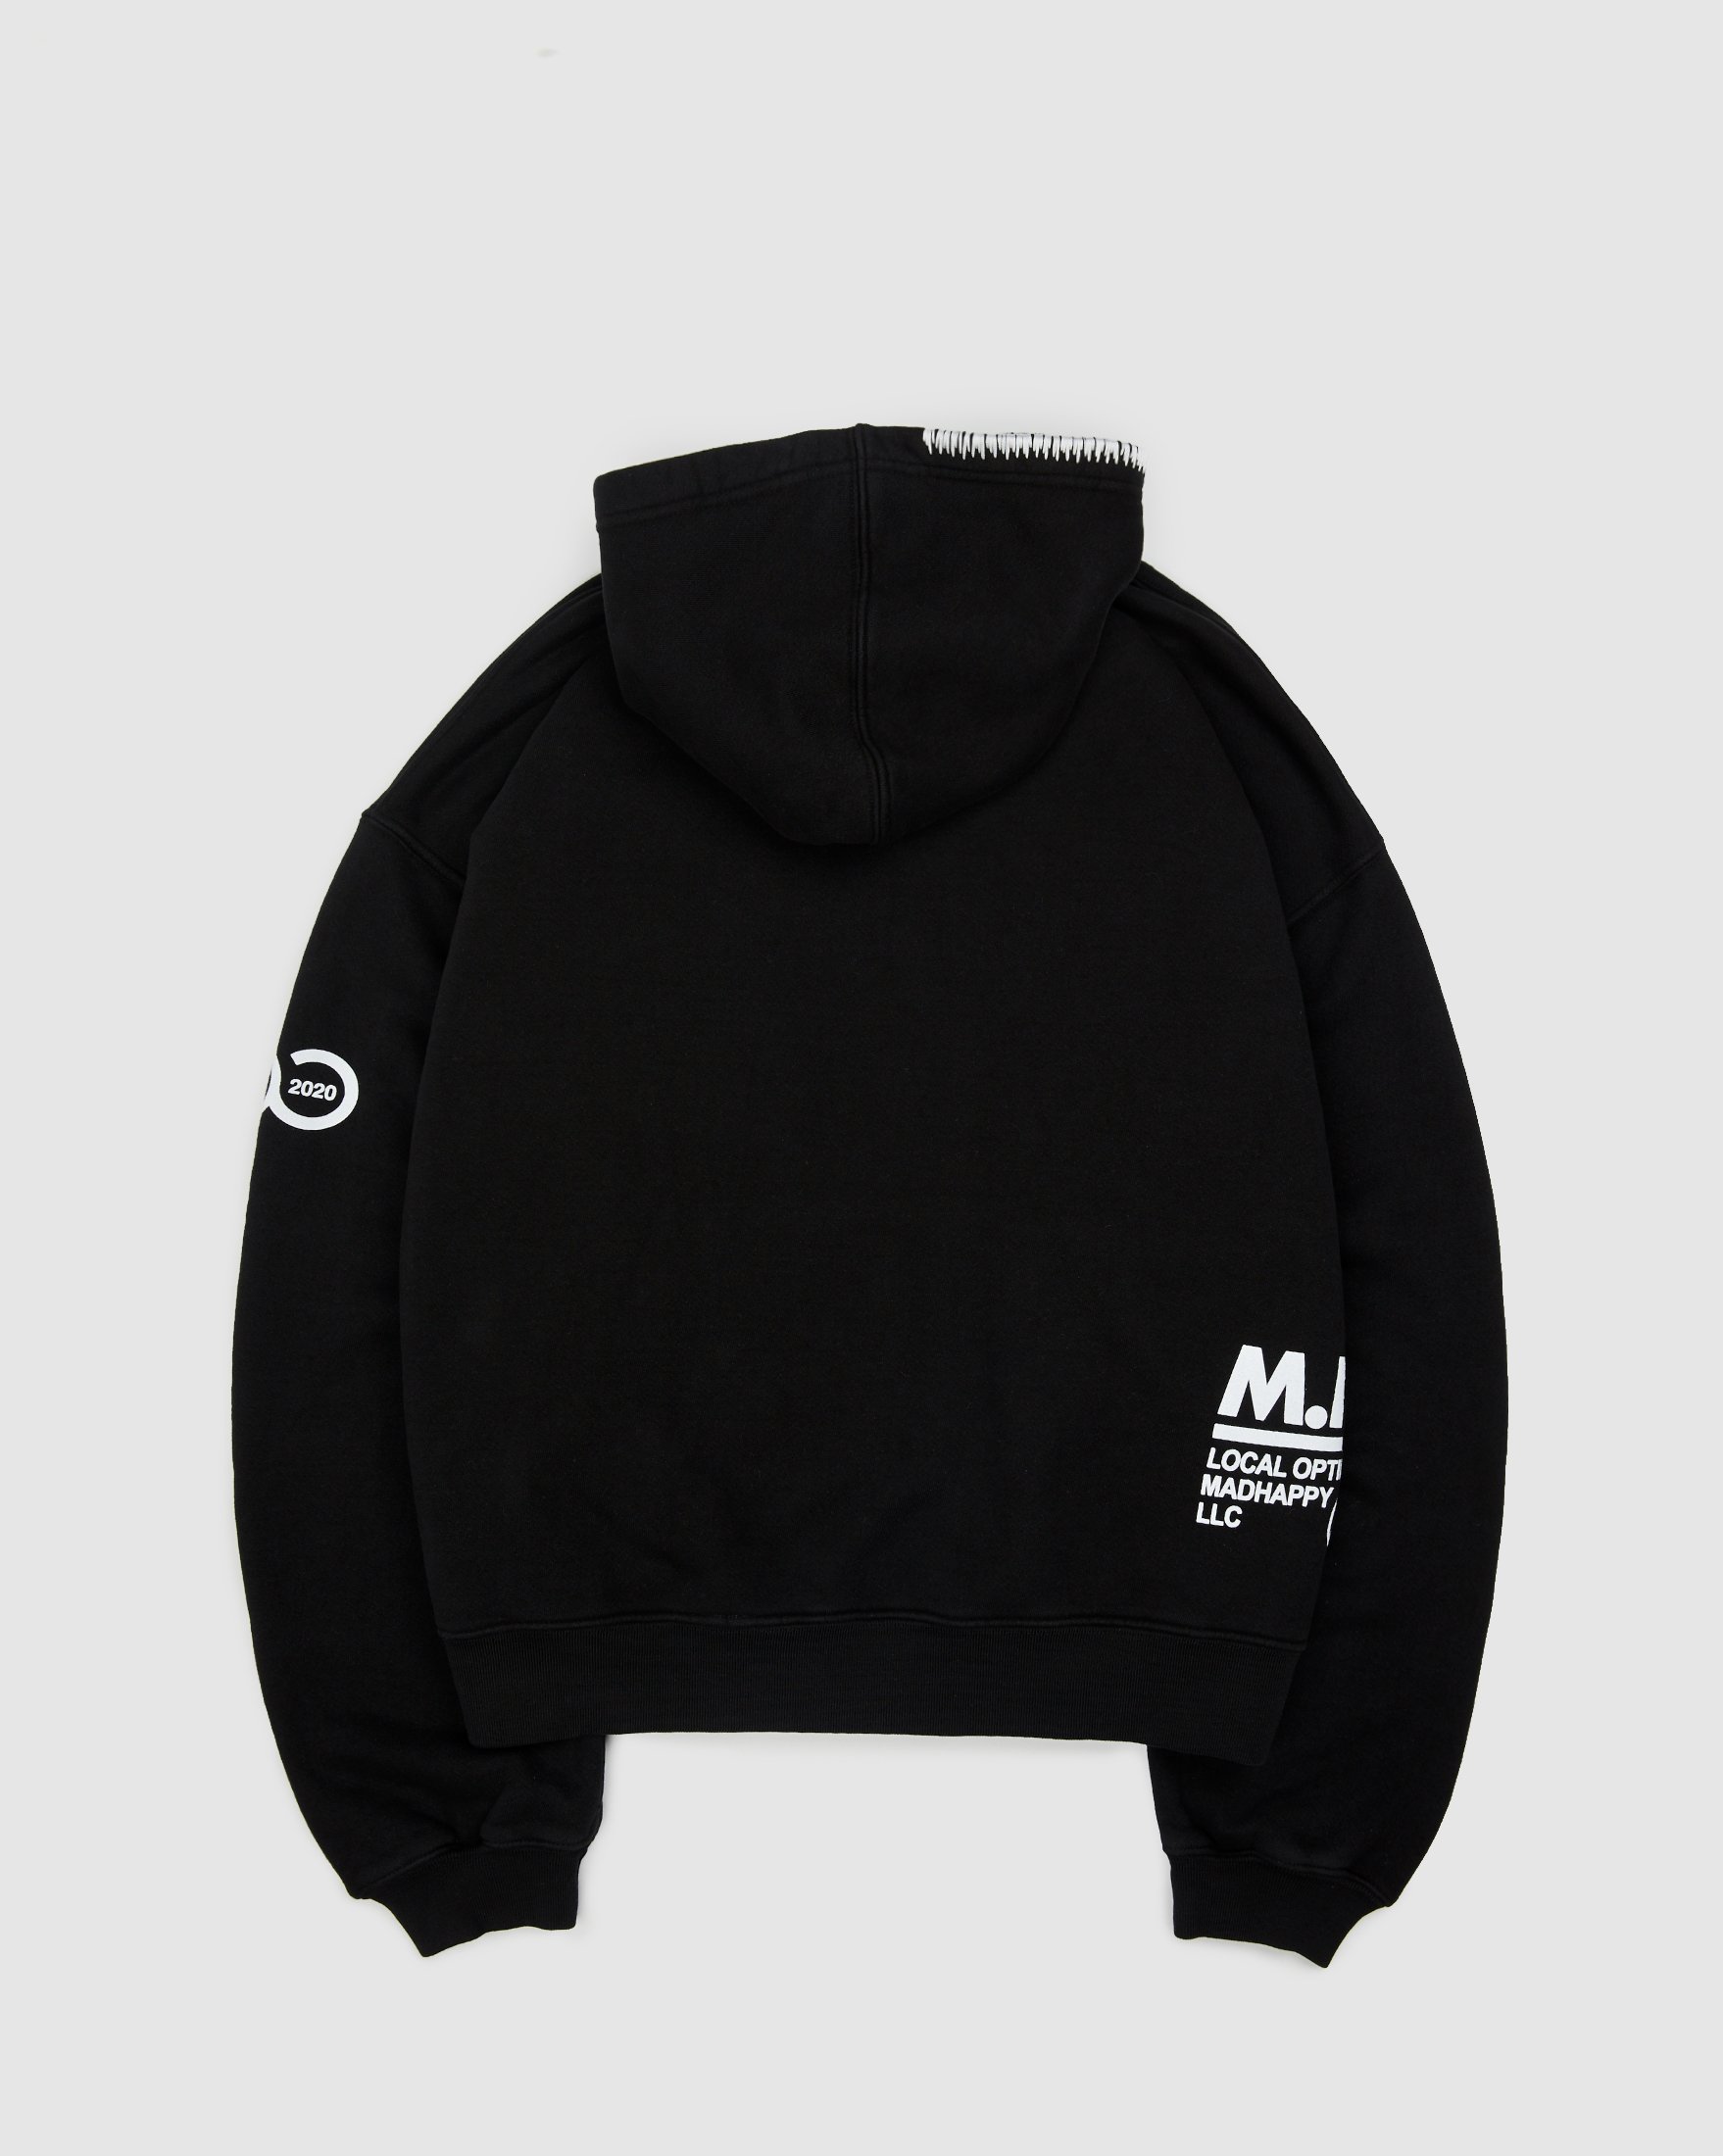 Colette Mon Amour - Madhappy Hoodie Black - Clothing - Black - Image 2